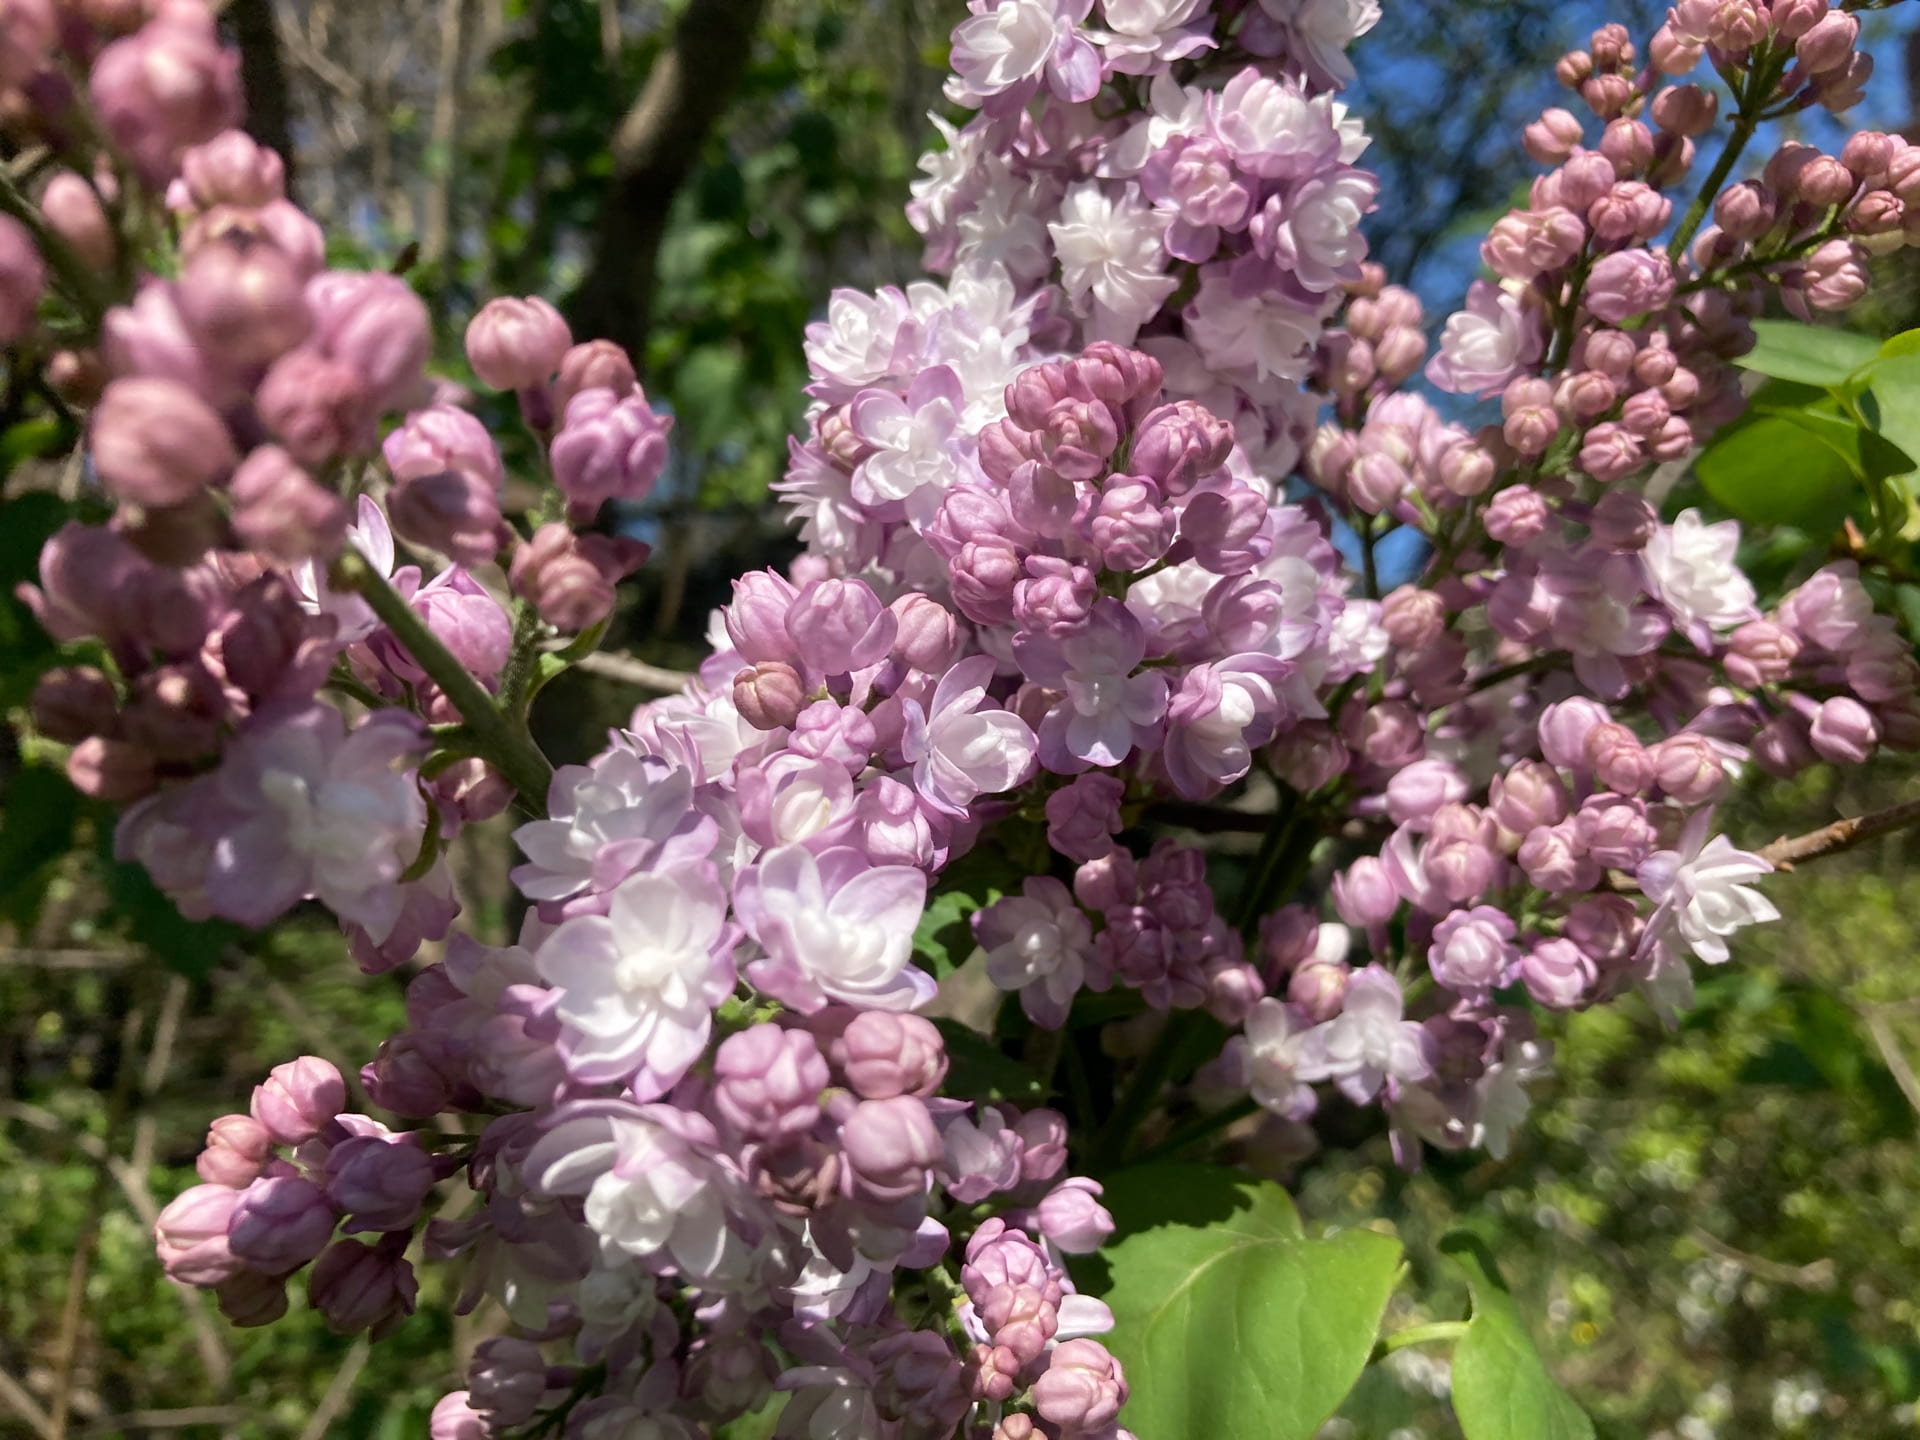 Fragrant flowers of this lilac, Syringa vulgaris cv., permeate the South Lawn with their sweet scent.